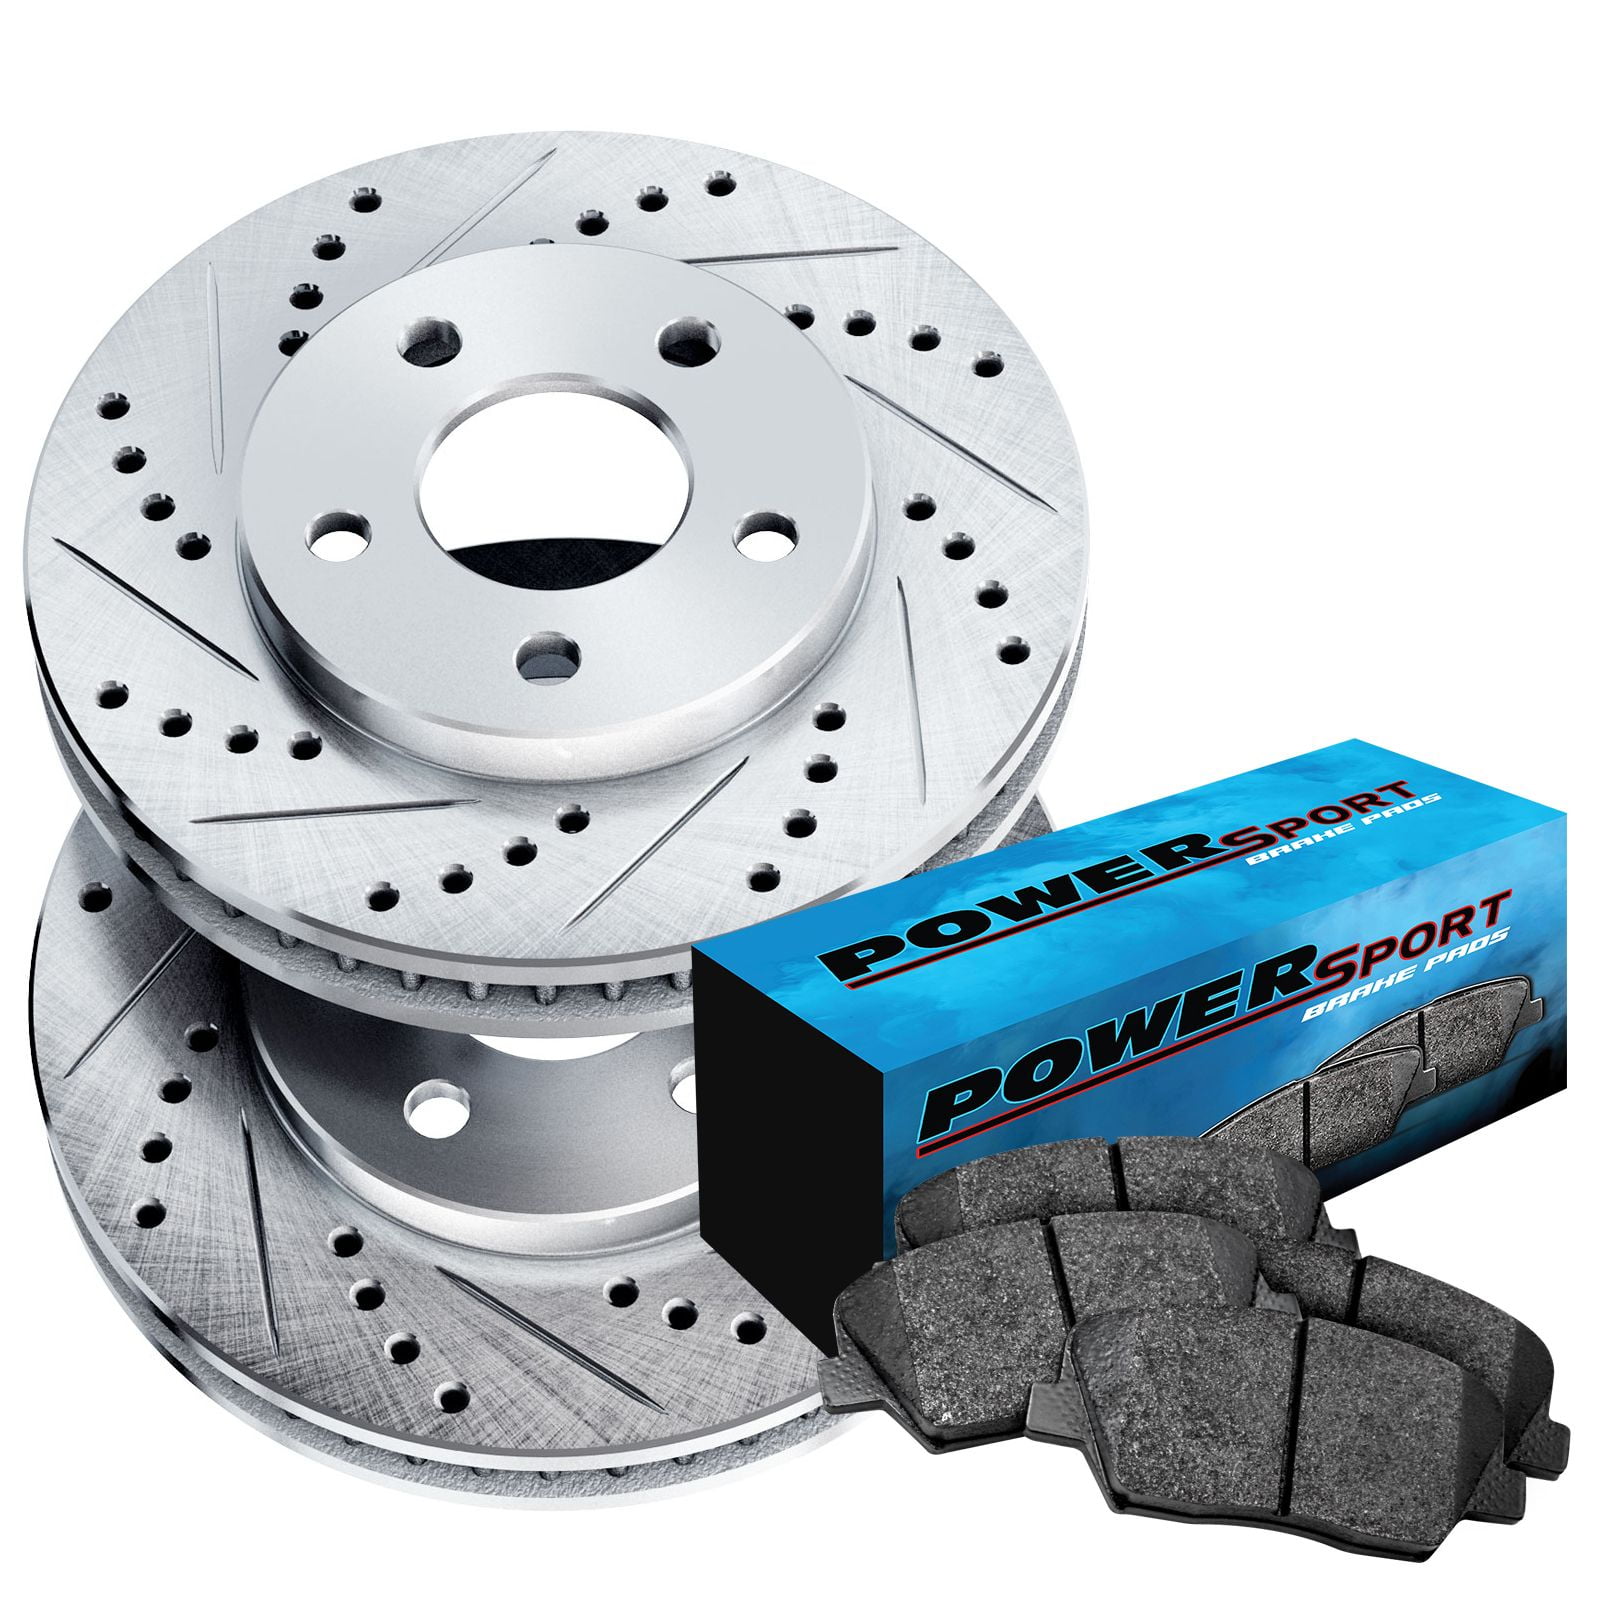 PowerSport Front Brakes and Rotors Kit |Front Brake Pads| Brake Rotors and  Pads| Semi Metallic Brake Pads and Rotors |fits 2012-2021 Audi A3 Quattro, 